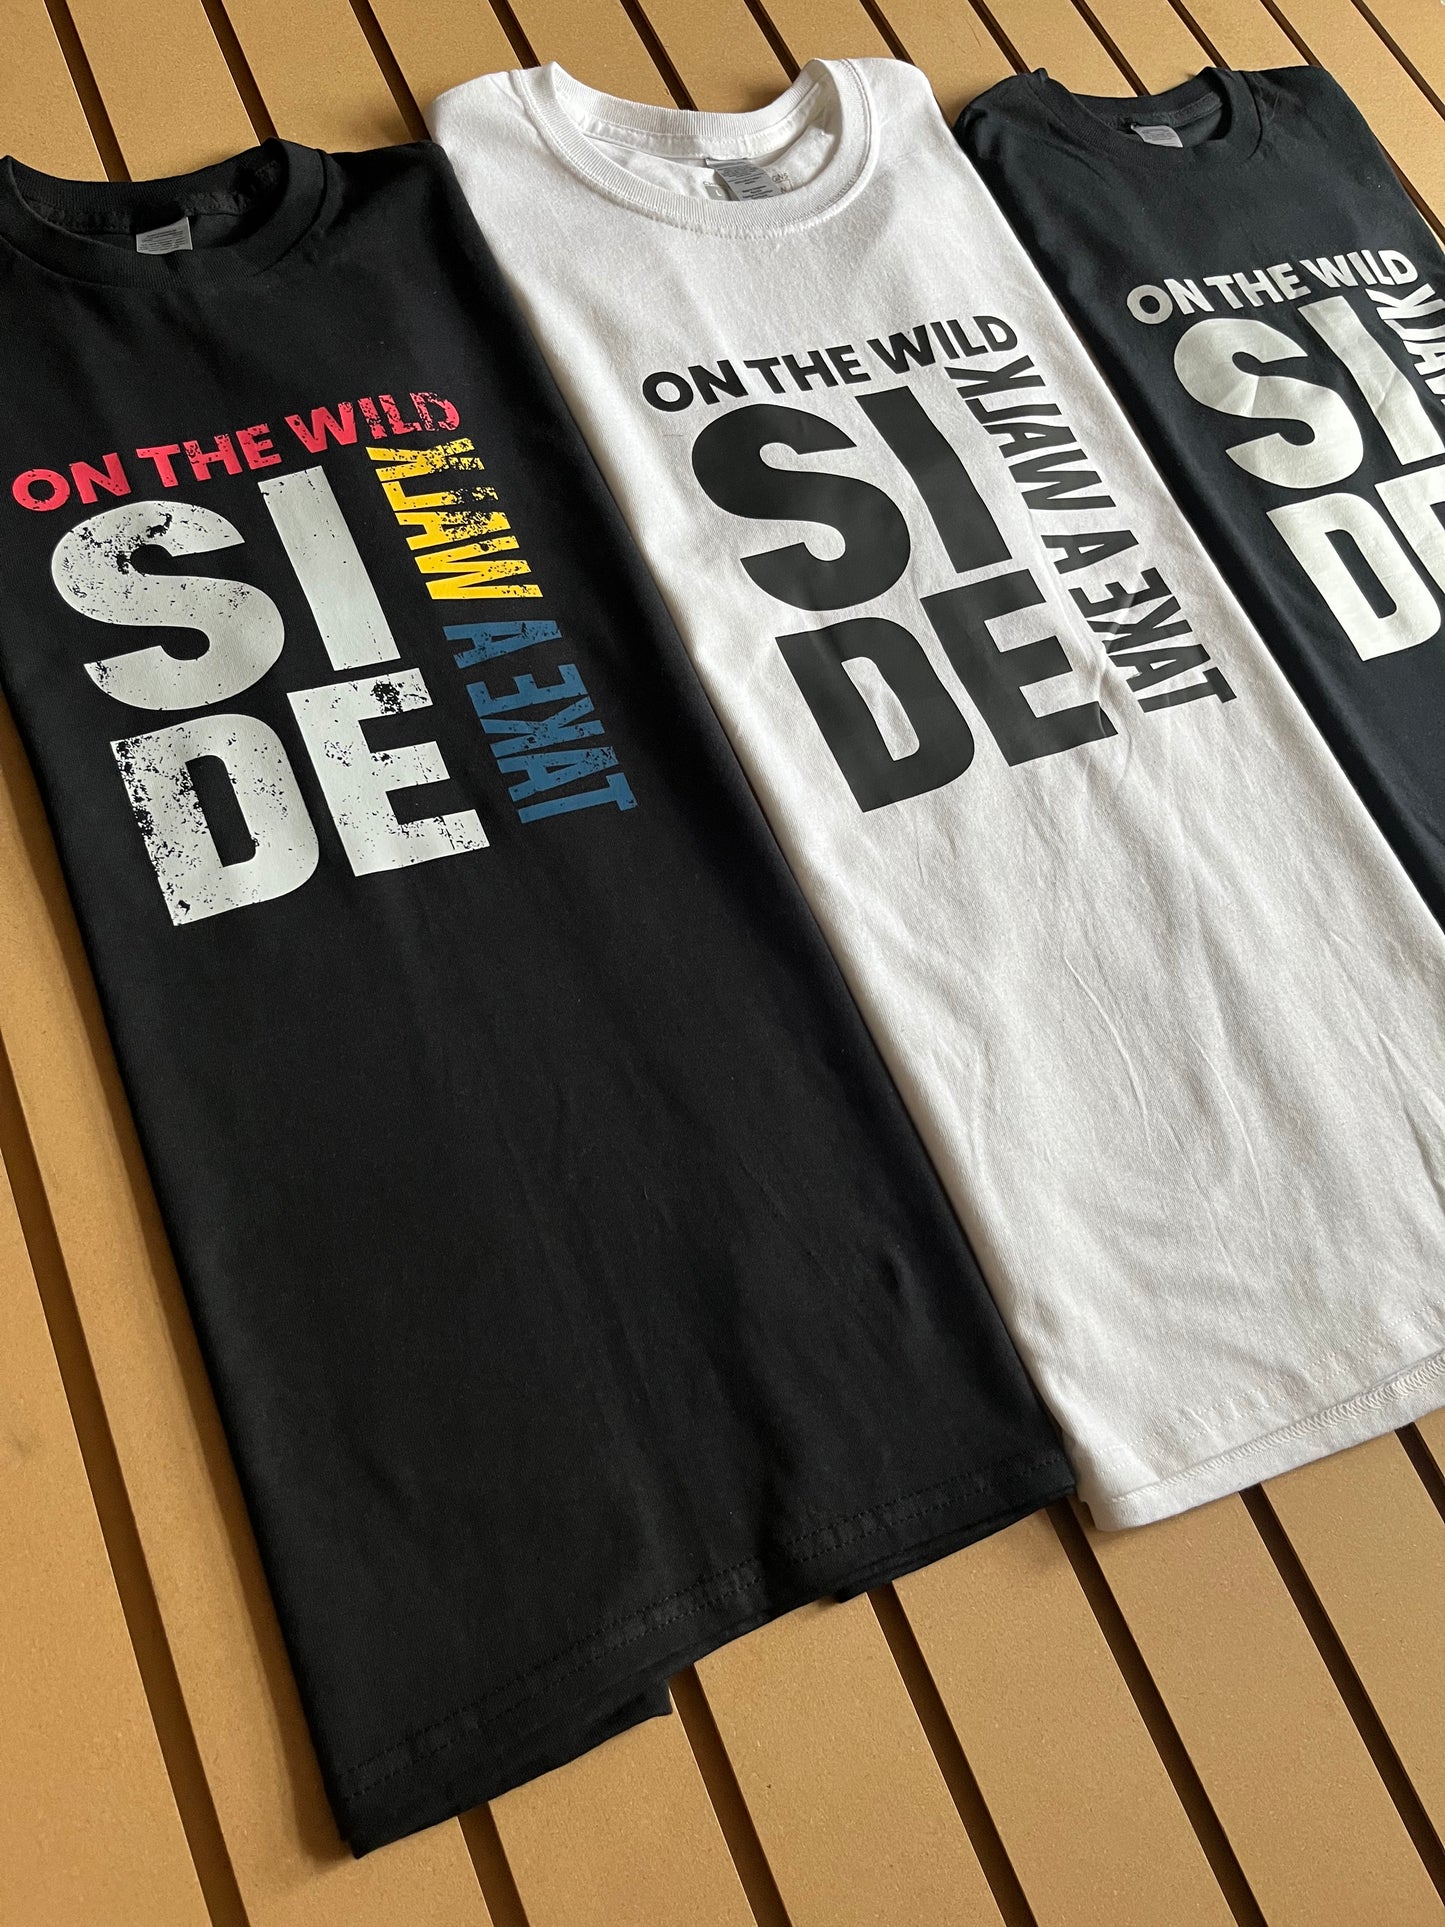 Take a walk on the wilde side (Colour Text) - Relaxed Fit Tee